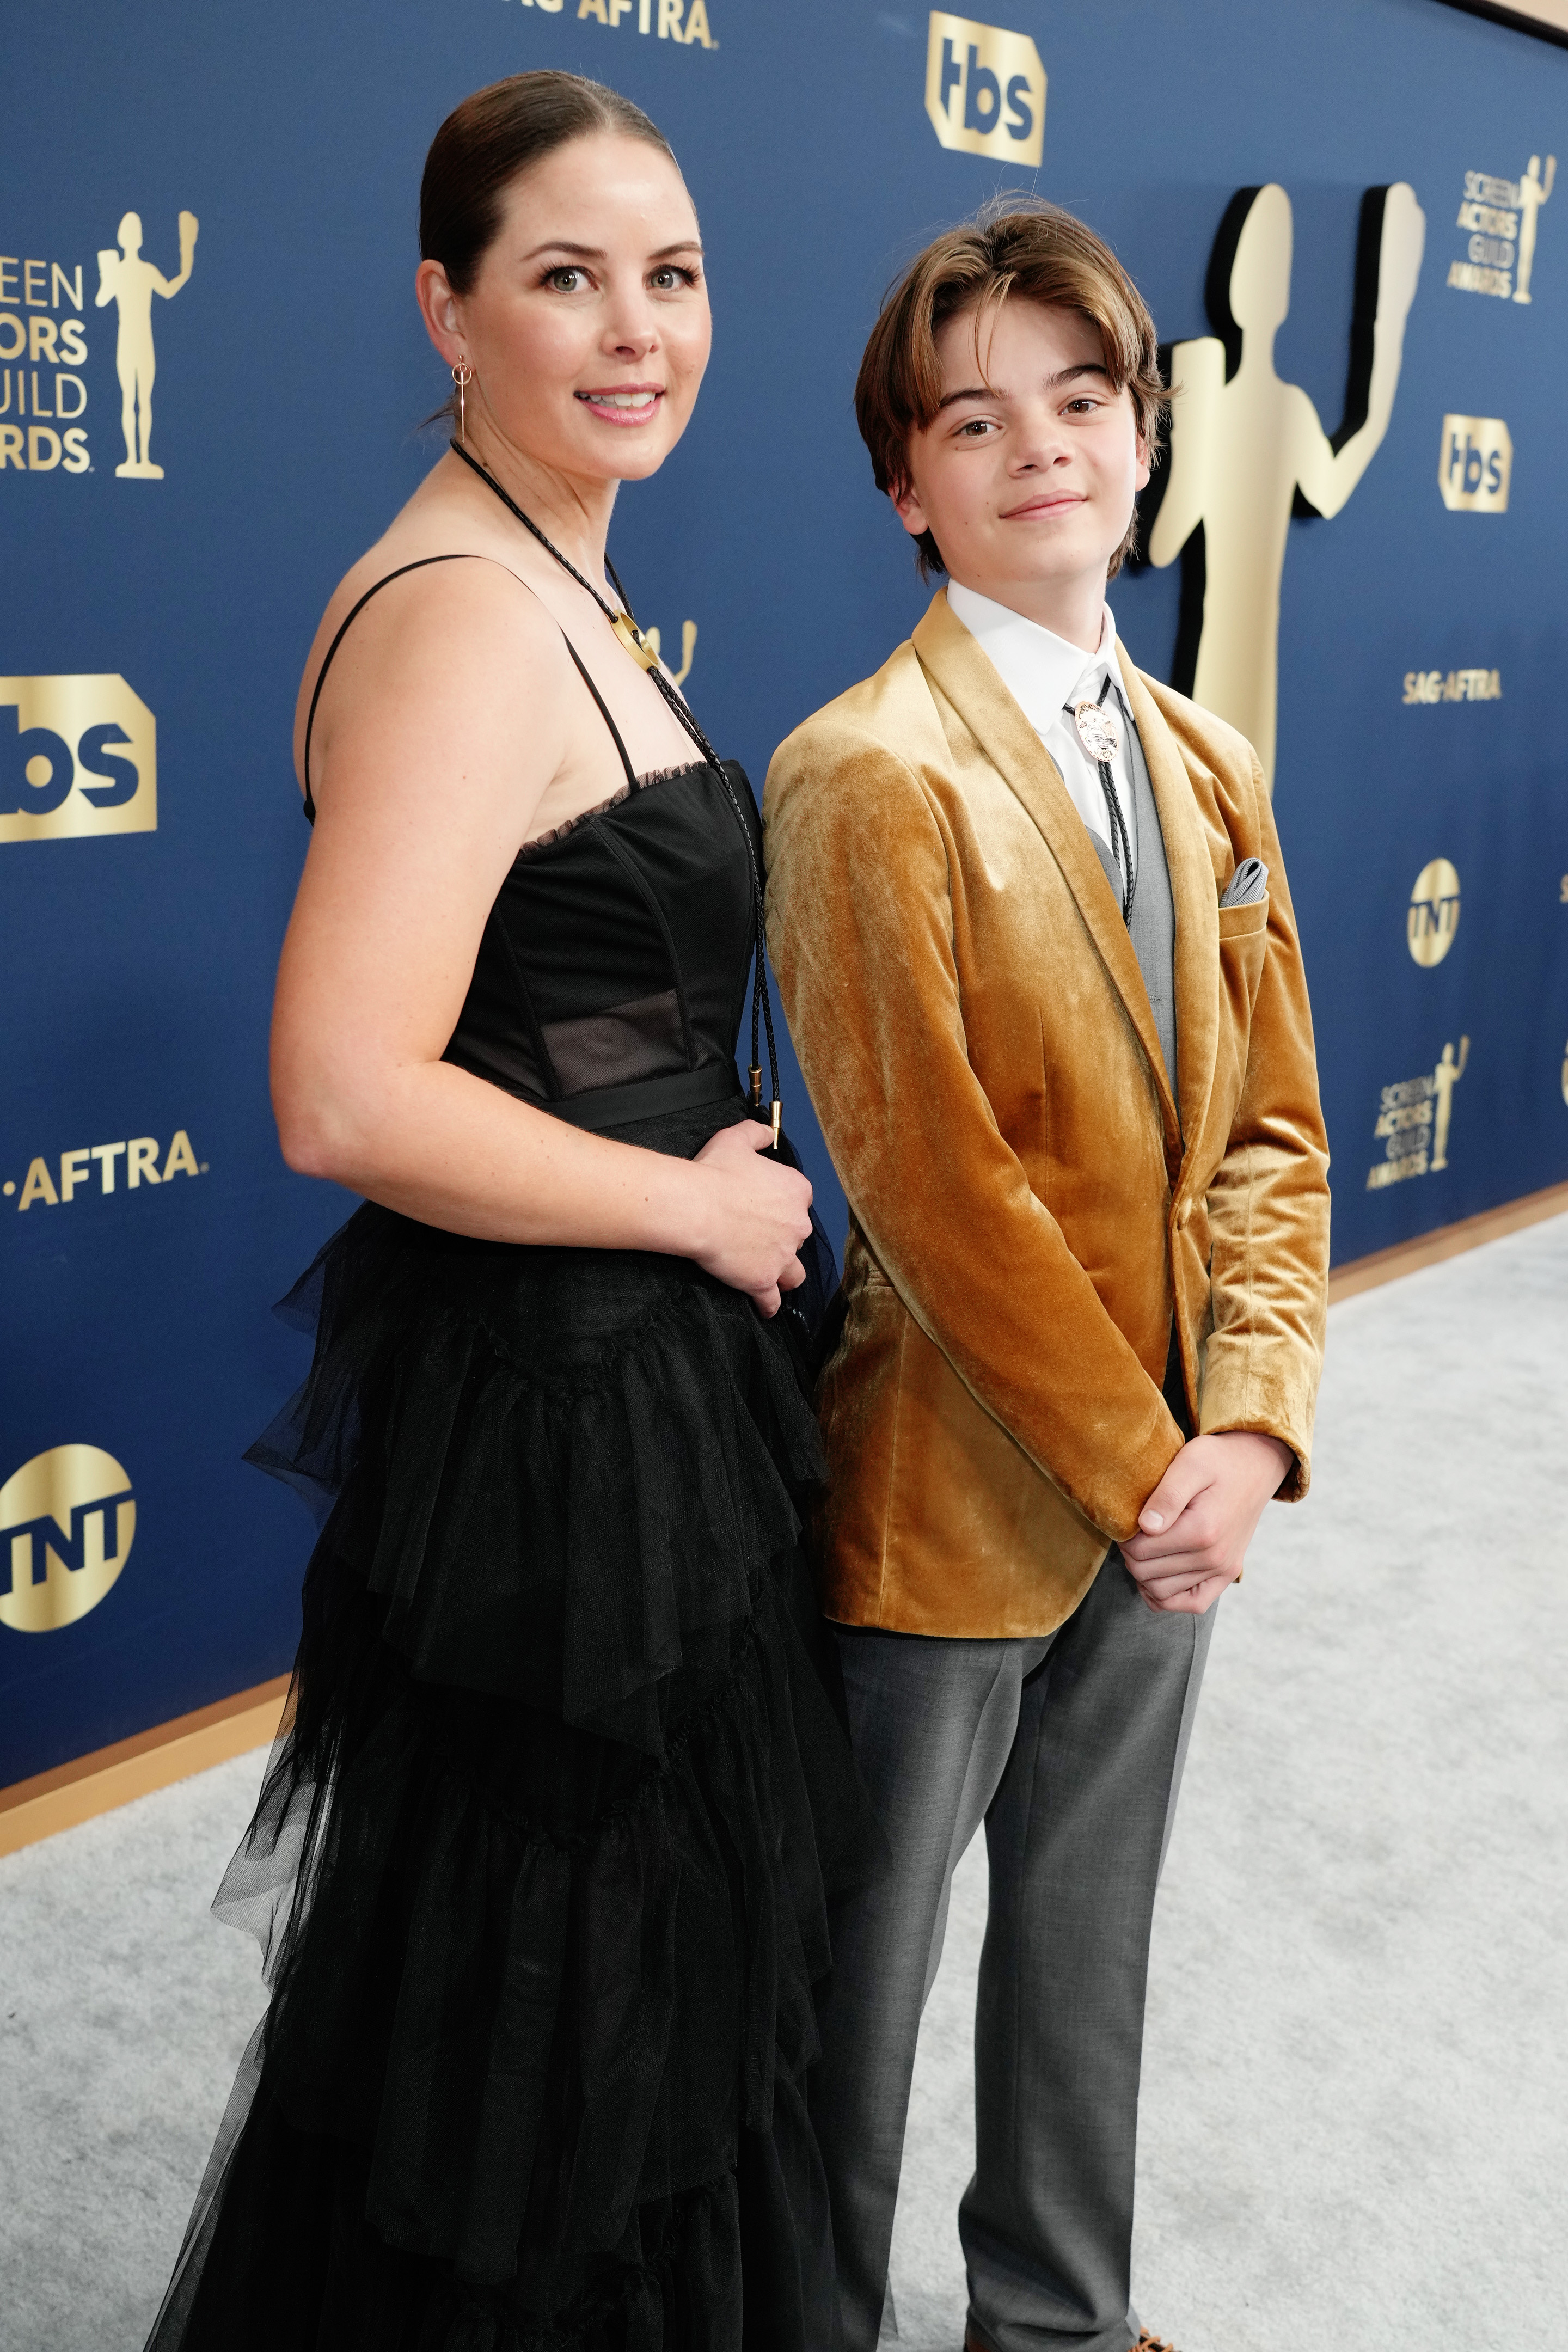 Kristy Phillips and Brecken Merrill at the 28th Screen Actors Guild Awards at Barker Hangar on February 27, 2022, in Santa Monica, California. | Source: Getty Images